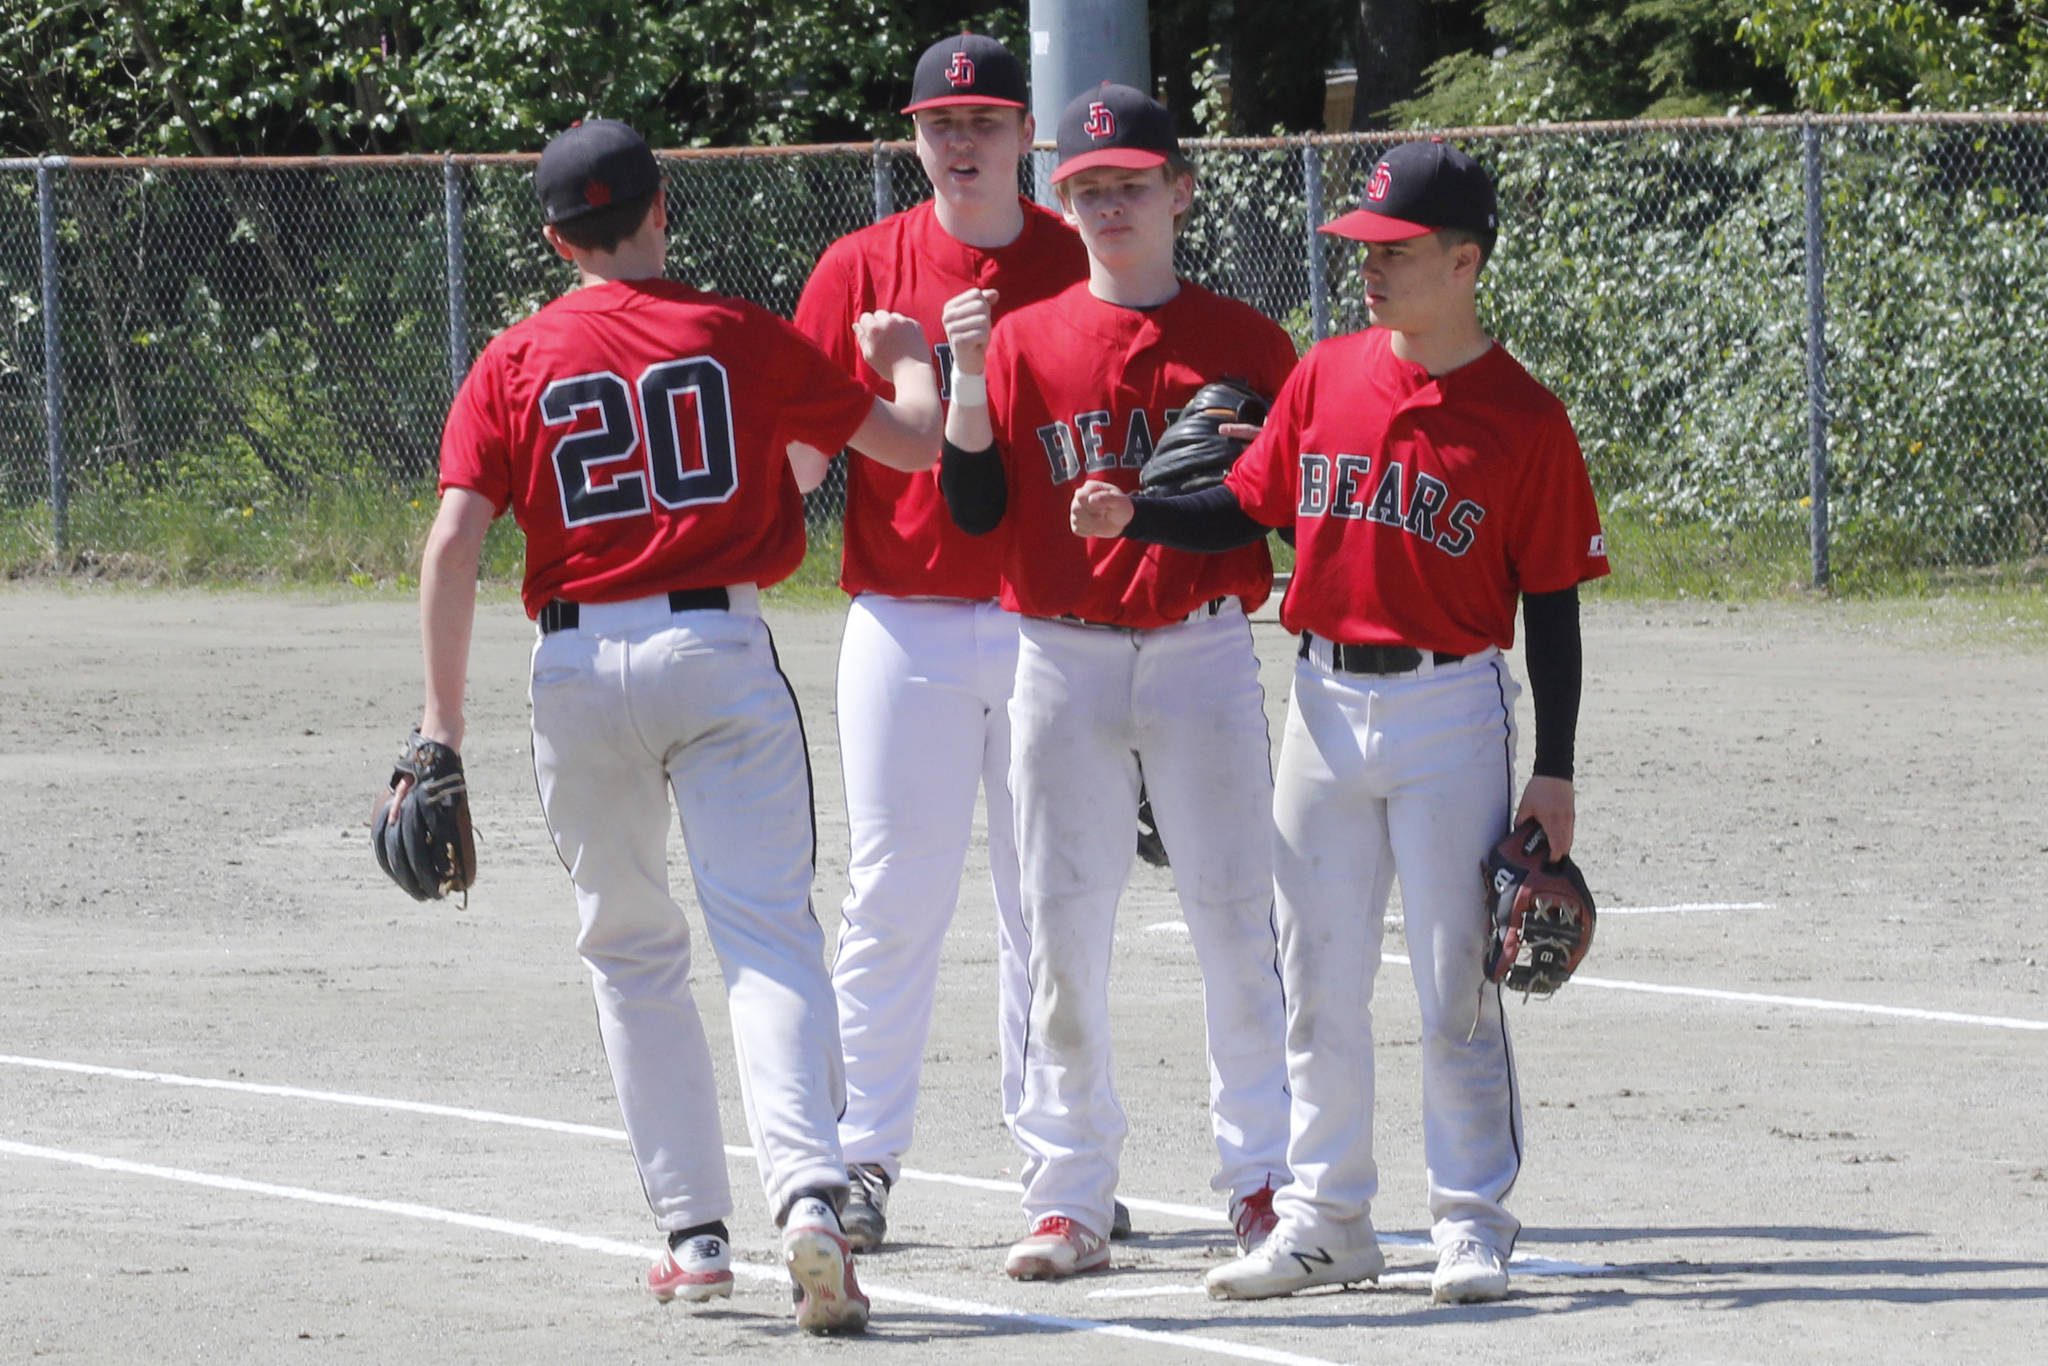 Juneau-Douglas High School: Yadaa.at Kale players warm up before the Region V title game against Ketchikan on Saturday, May 25, 2019. (Alex McCarthy | Juneau Empire)